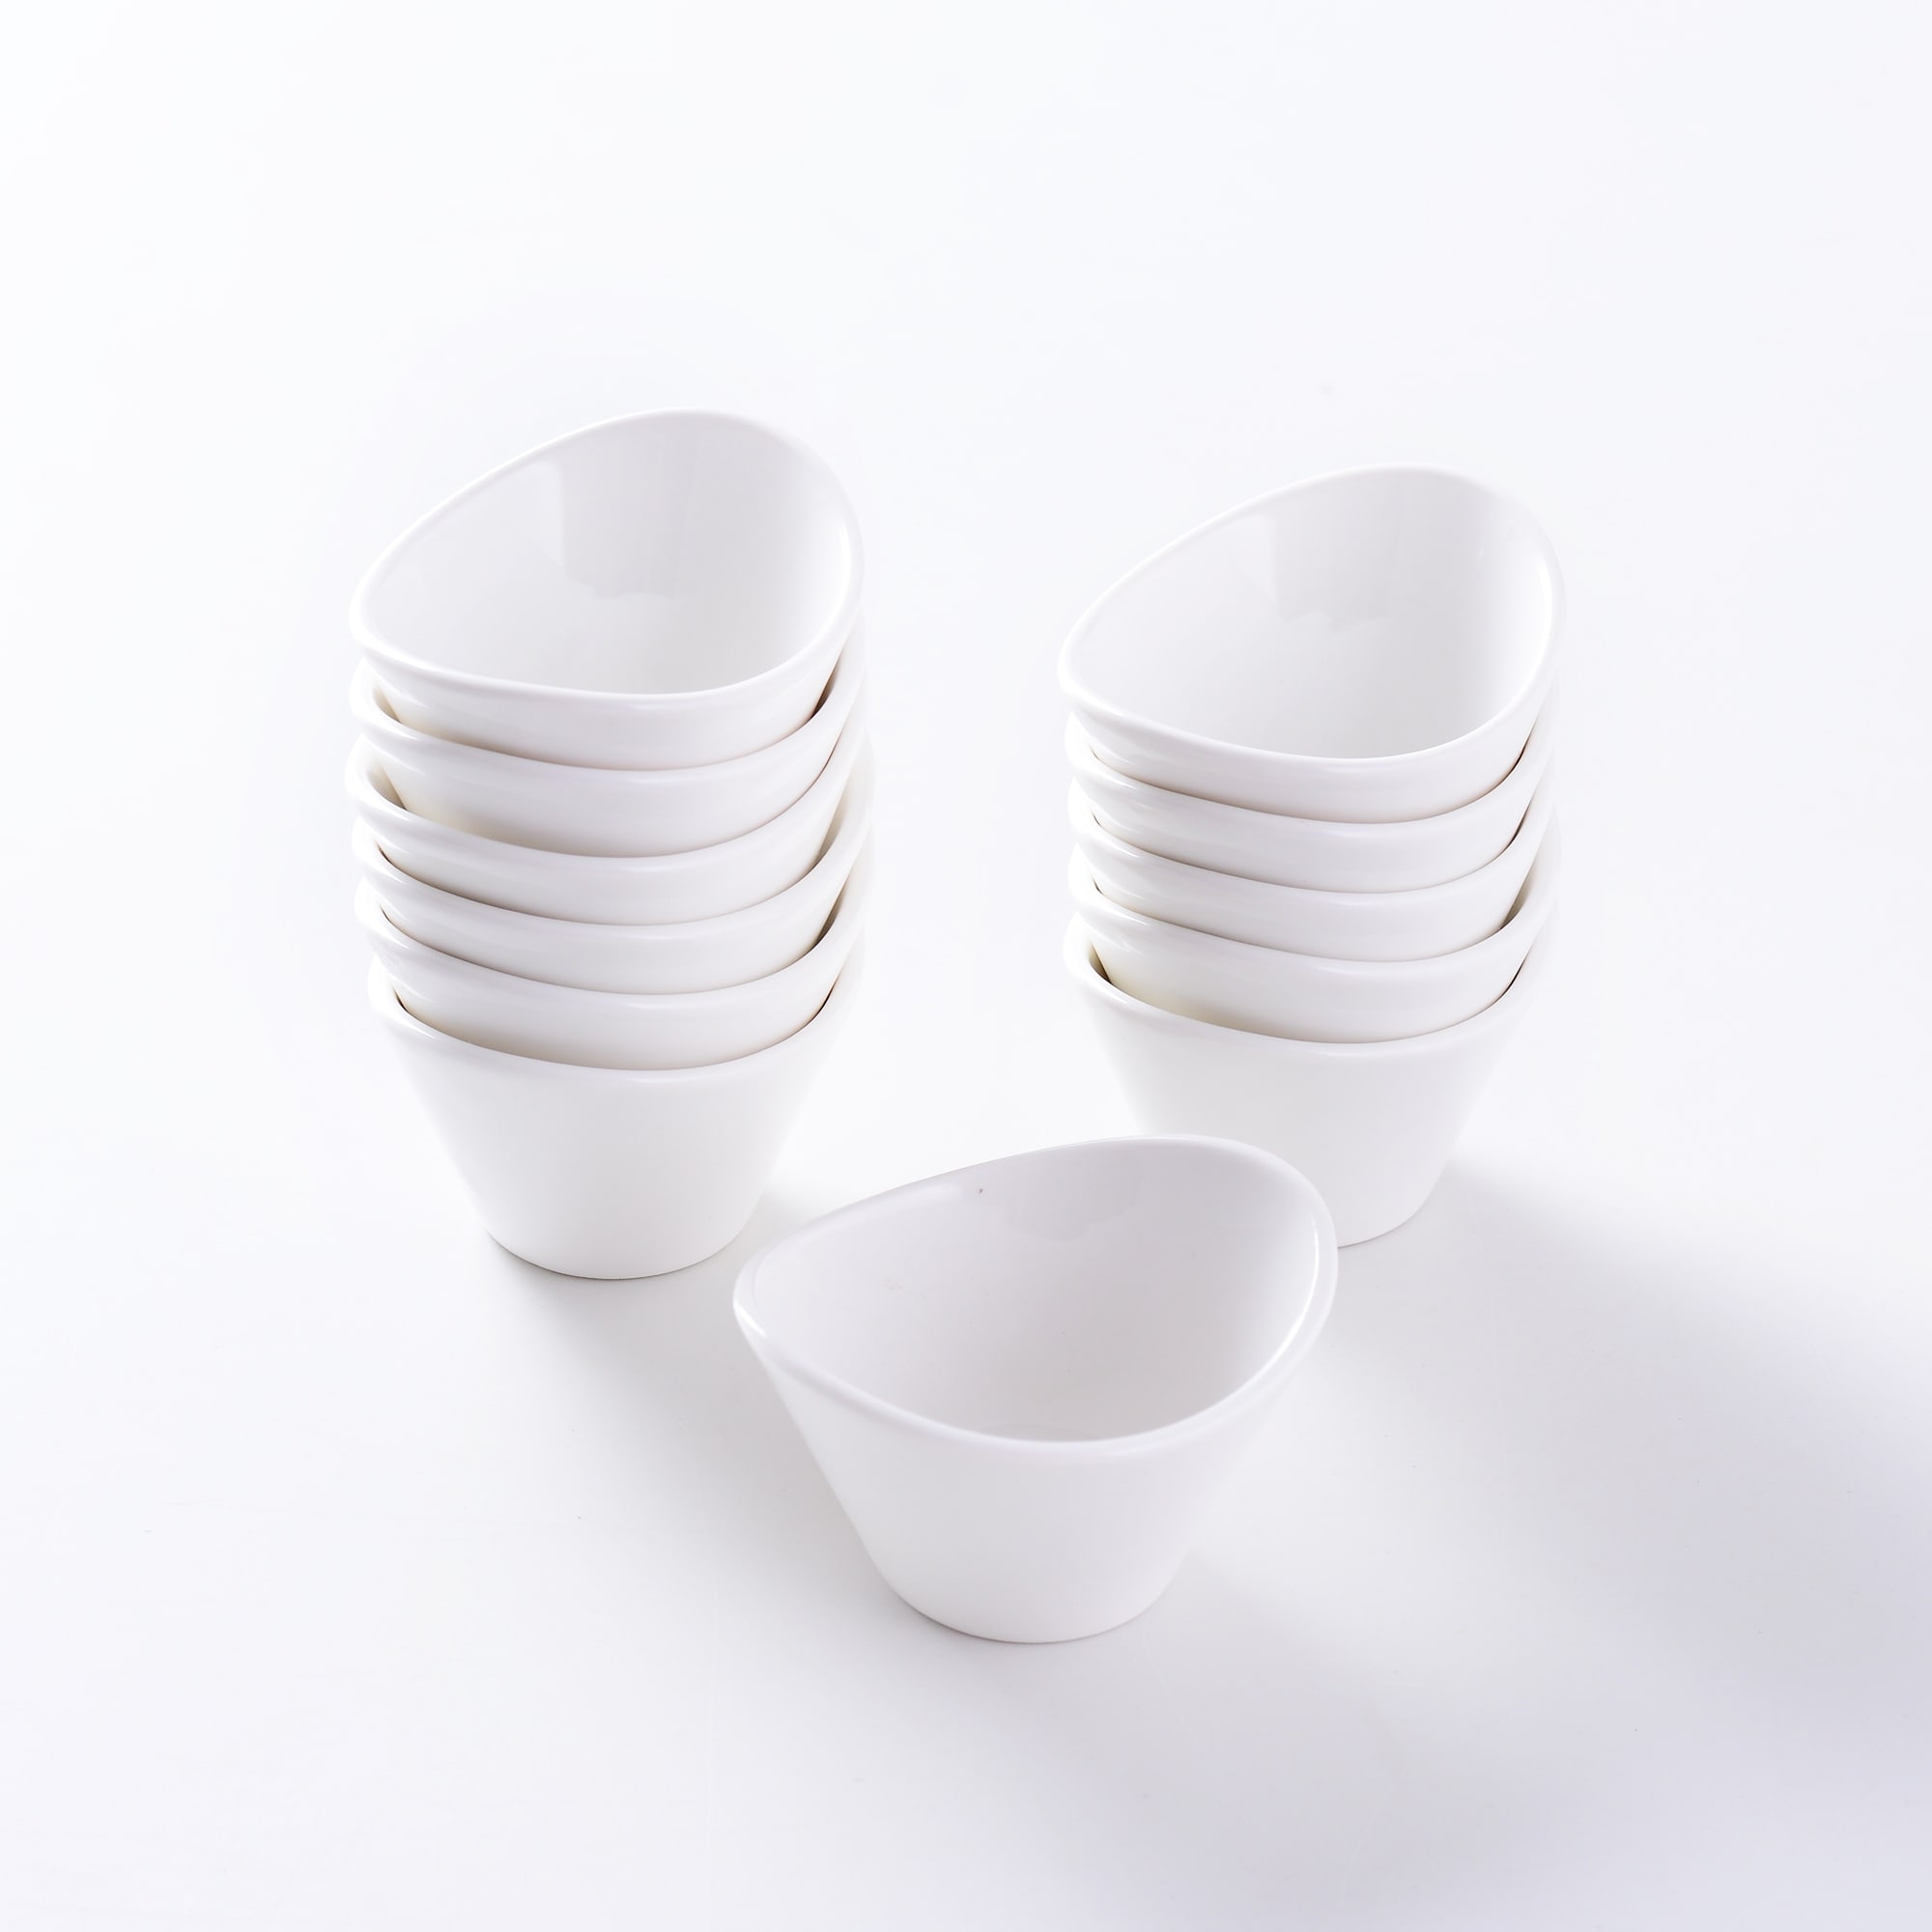 https://ak1.ostkcdn.com/images/products/is/images/direct/ae78176fa669e31785ff36aeff8f77253d8703bb/2.6%27%27-White-Porcelain-Ramekins-Souffle-Dishes-Baking-Cups-Set-of-12.jpg